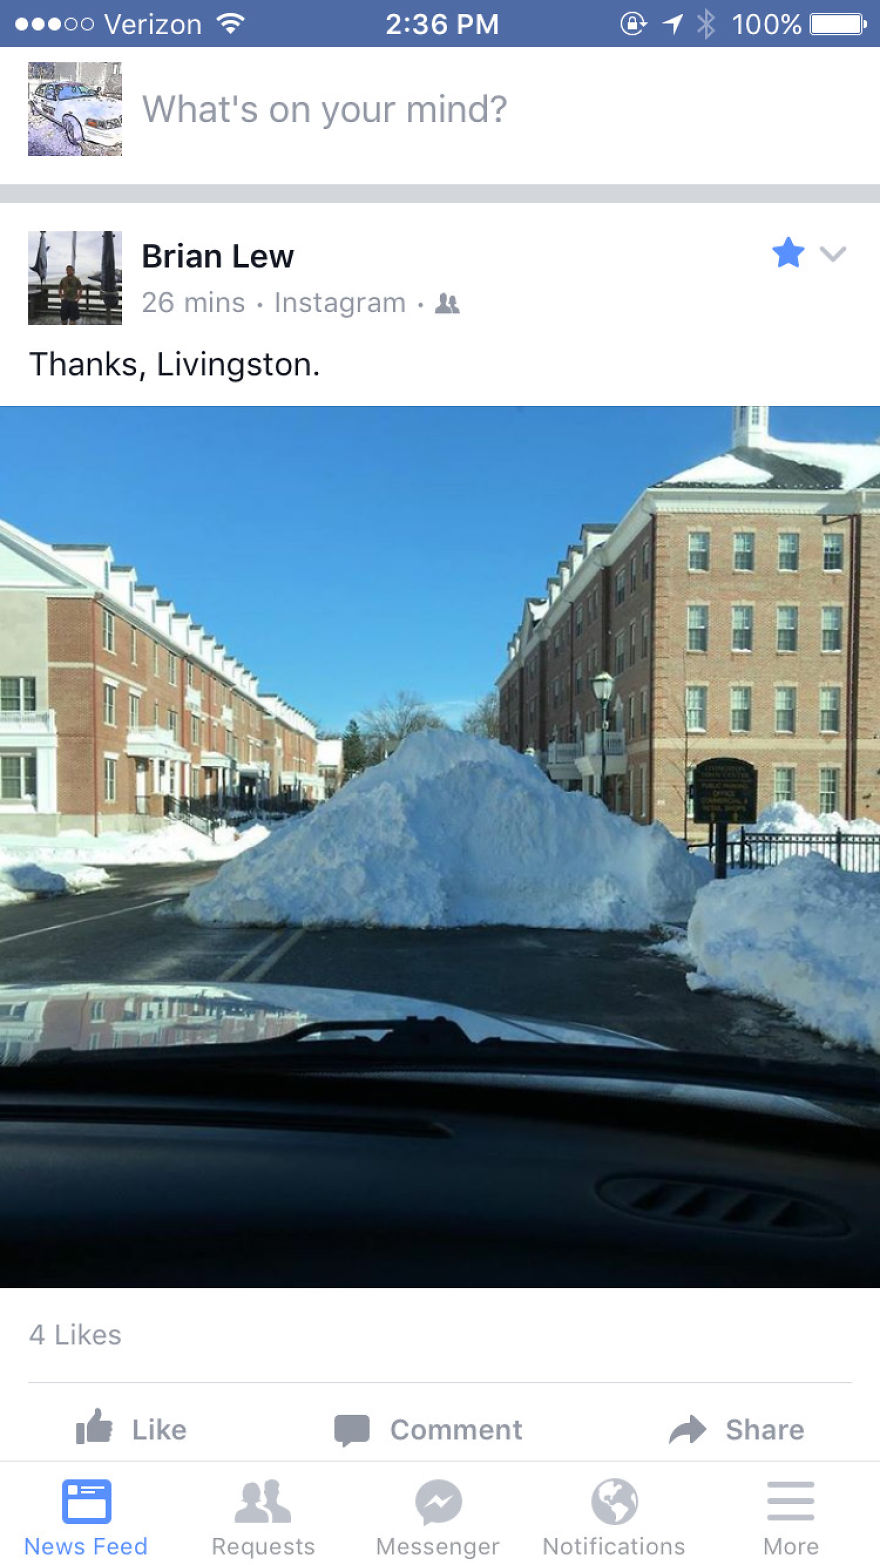 Seen In Livingston, Nj... Plowers Blocked The Entrance To A Shopping Area With Open Stores